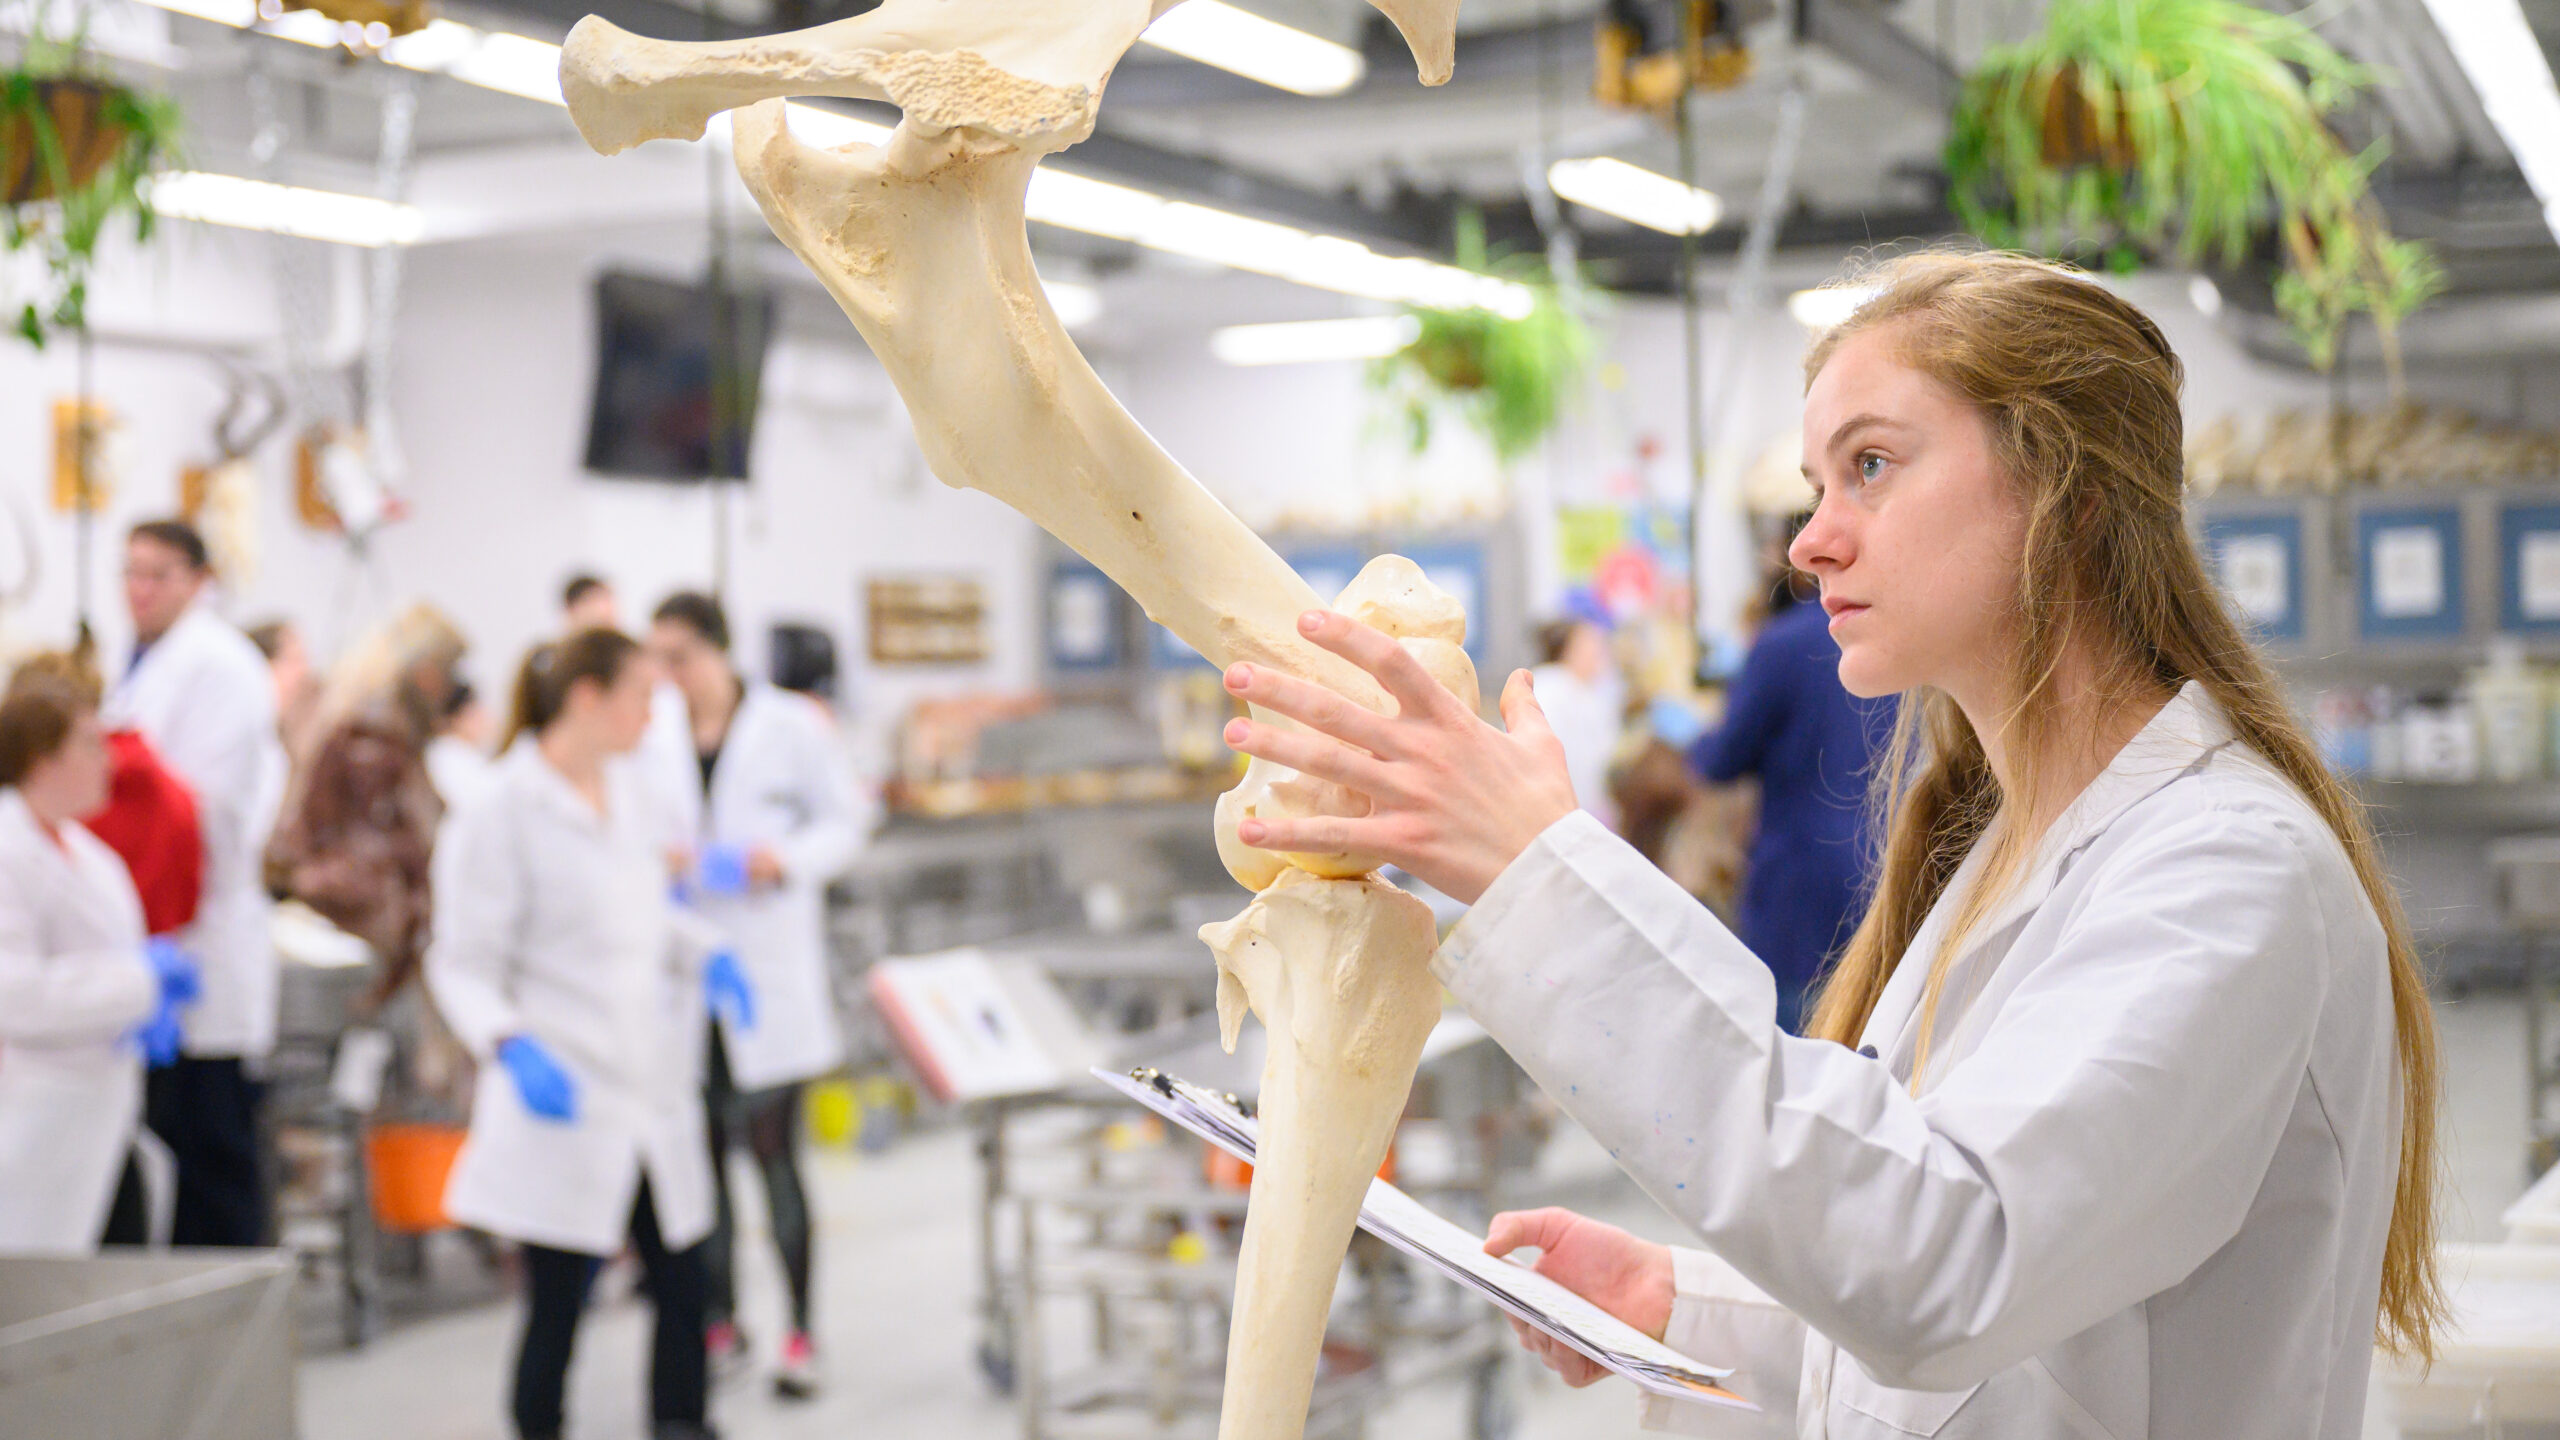 A blonde female veterinary student examines standing leg bones in an anatomy lab.